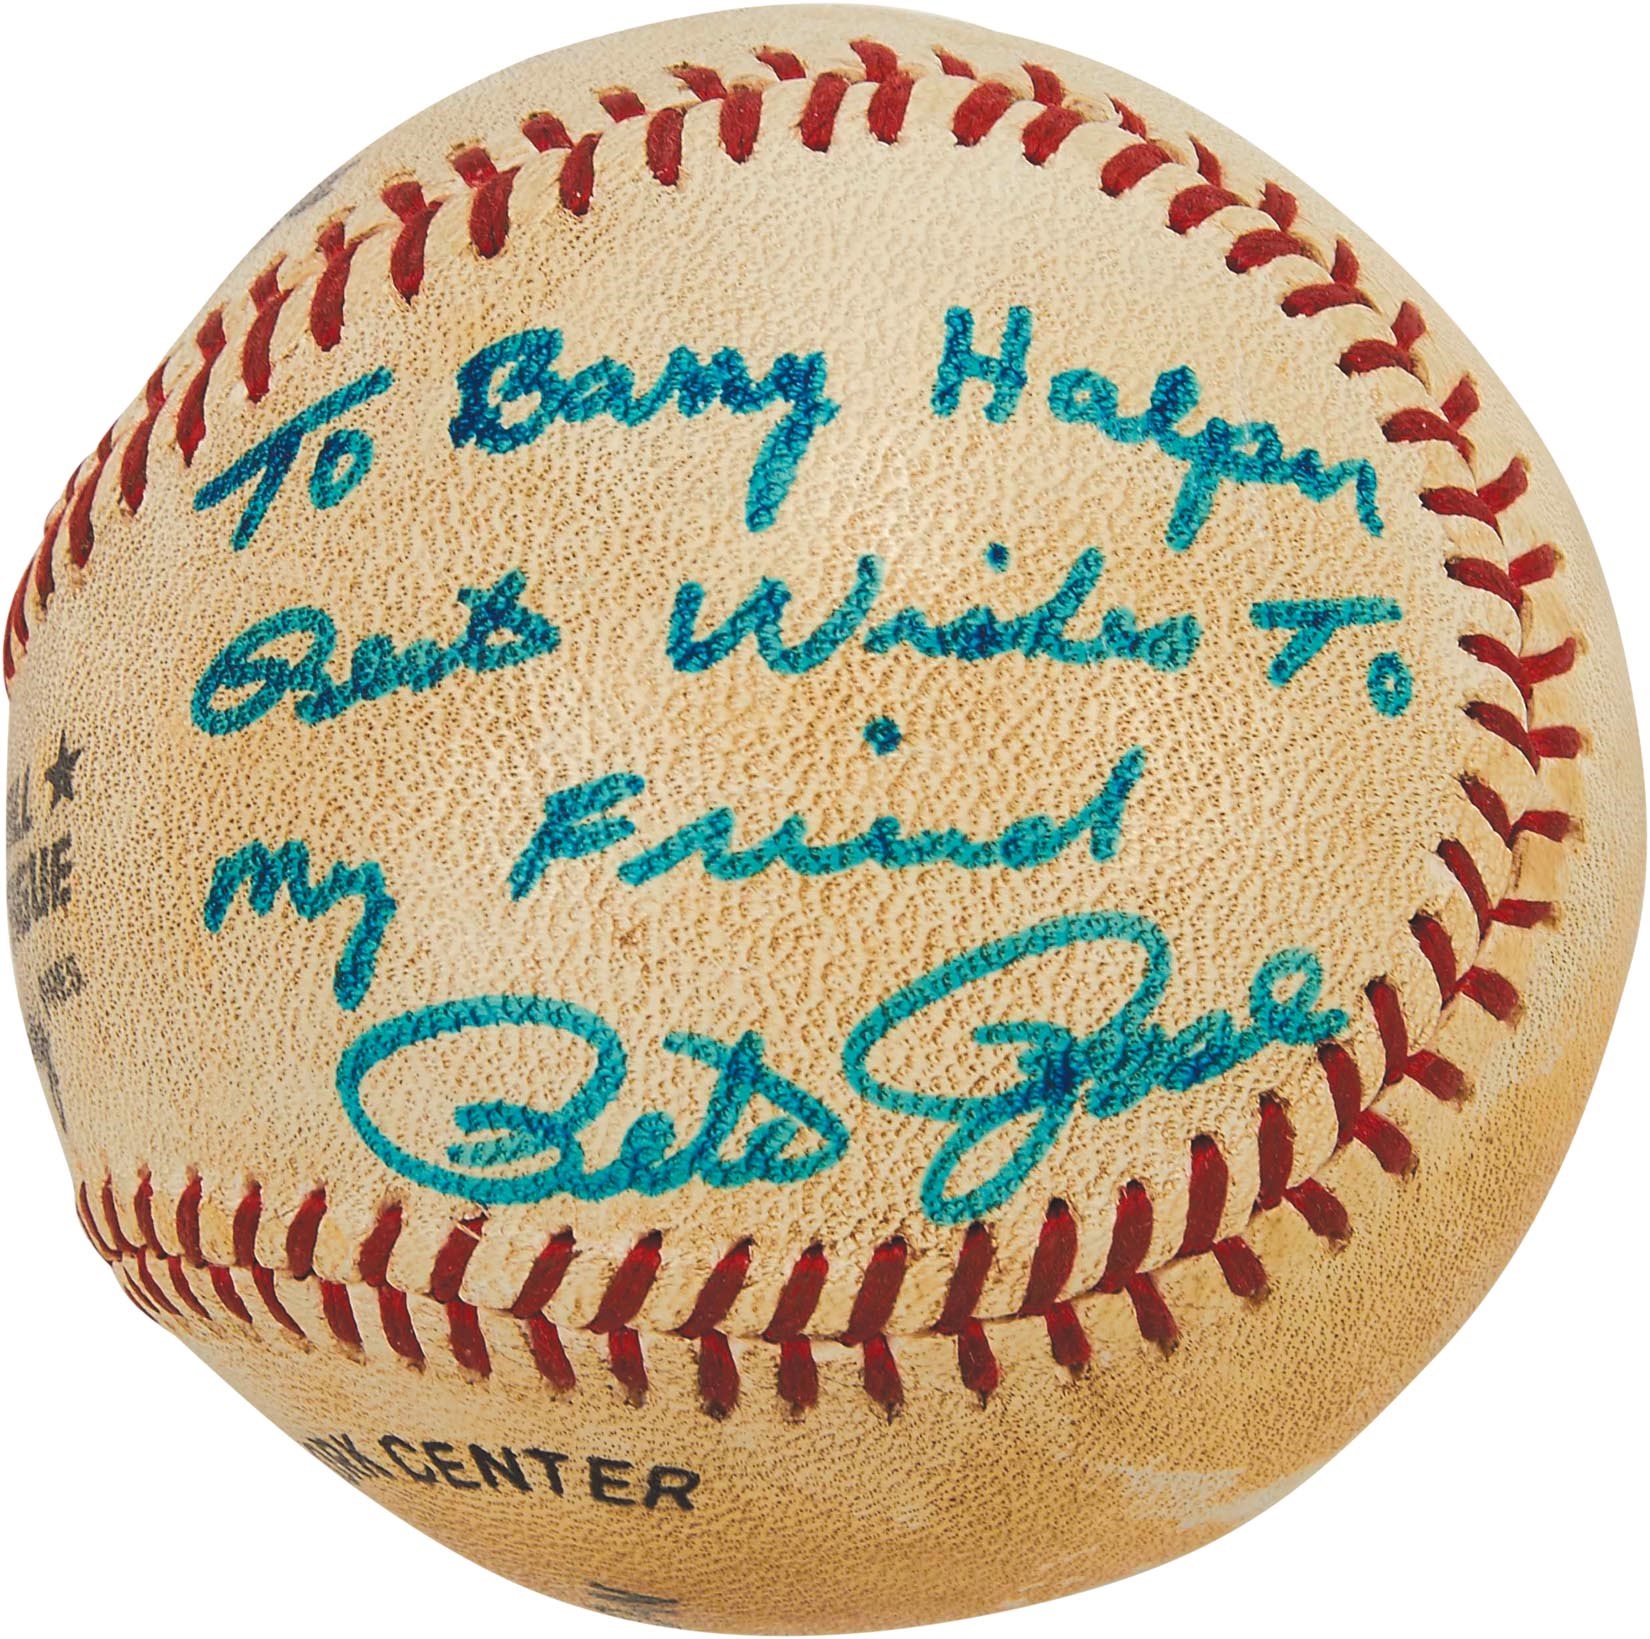 Pete Rose & Cincinnati Reds - Pete Rose 3,630th Hit Ball Tying Stan Musial for Most NL Hits - Gifted to Barry Halper (PSA)